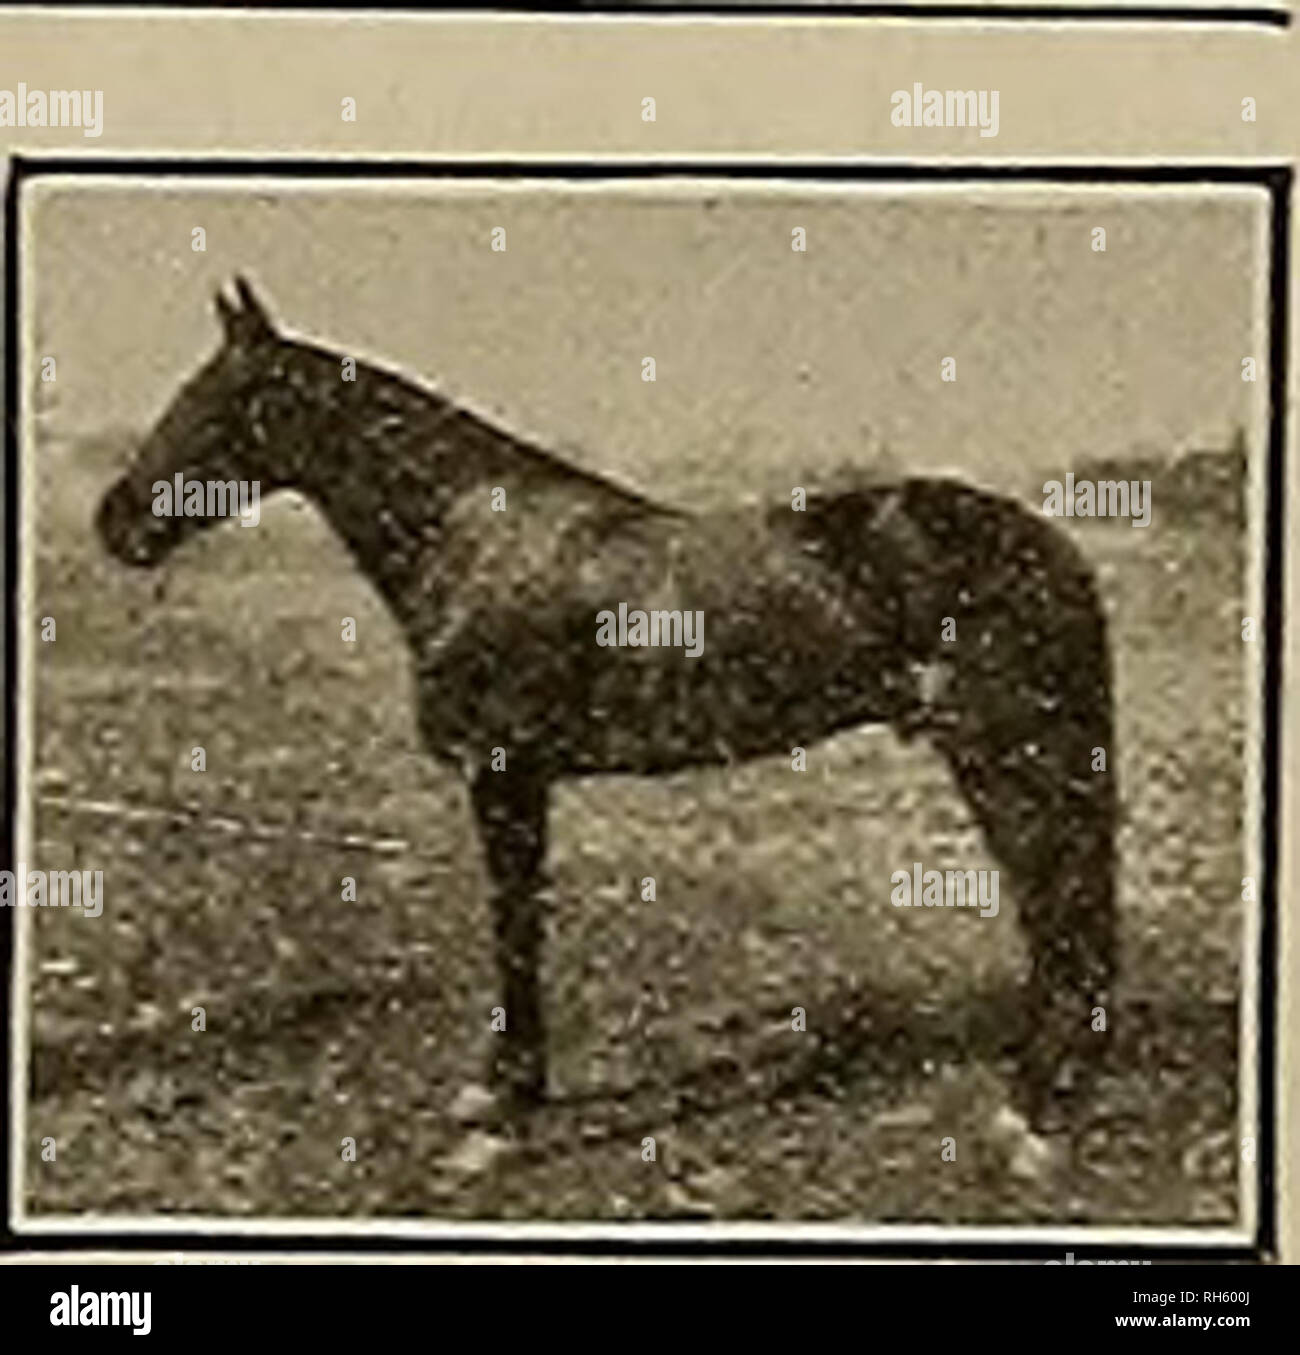 . Breeder and sportsman. Horses. SELL No 280 V Price 9.25 SEND FOR CATALOGUE J. DAVID WEST 1265-1267 Golden Gate Ave., near Fillmore St. Phone Park 1253 WHOLESALE AND RETAIL J THE PROOF 2,2:29 Q A.T.R. No. 51956 ° LICENCED PURE BRED 4 CERTIFICATE No. 1029 From the family of Bingen 2:06!4, foremost among present day champions of all ages and gaits. Son of The Exponent 2:11% (by Bingen, dam Iva Dee by Onward 2:25%), sire of 32 performers including The Temptress 2:08^, 6 three-year-olds, 20 two-year-olds and I yearling. First dam Chord 2:27 (dam of 4) by Wilkes Boy 2:24%, sire of 4 and the dams o Stock Photo